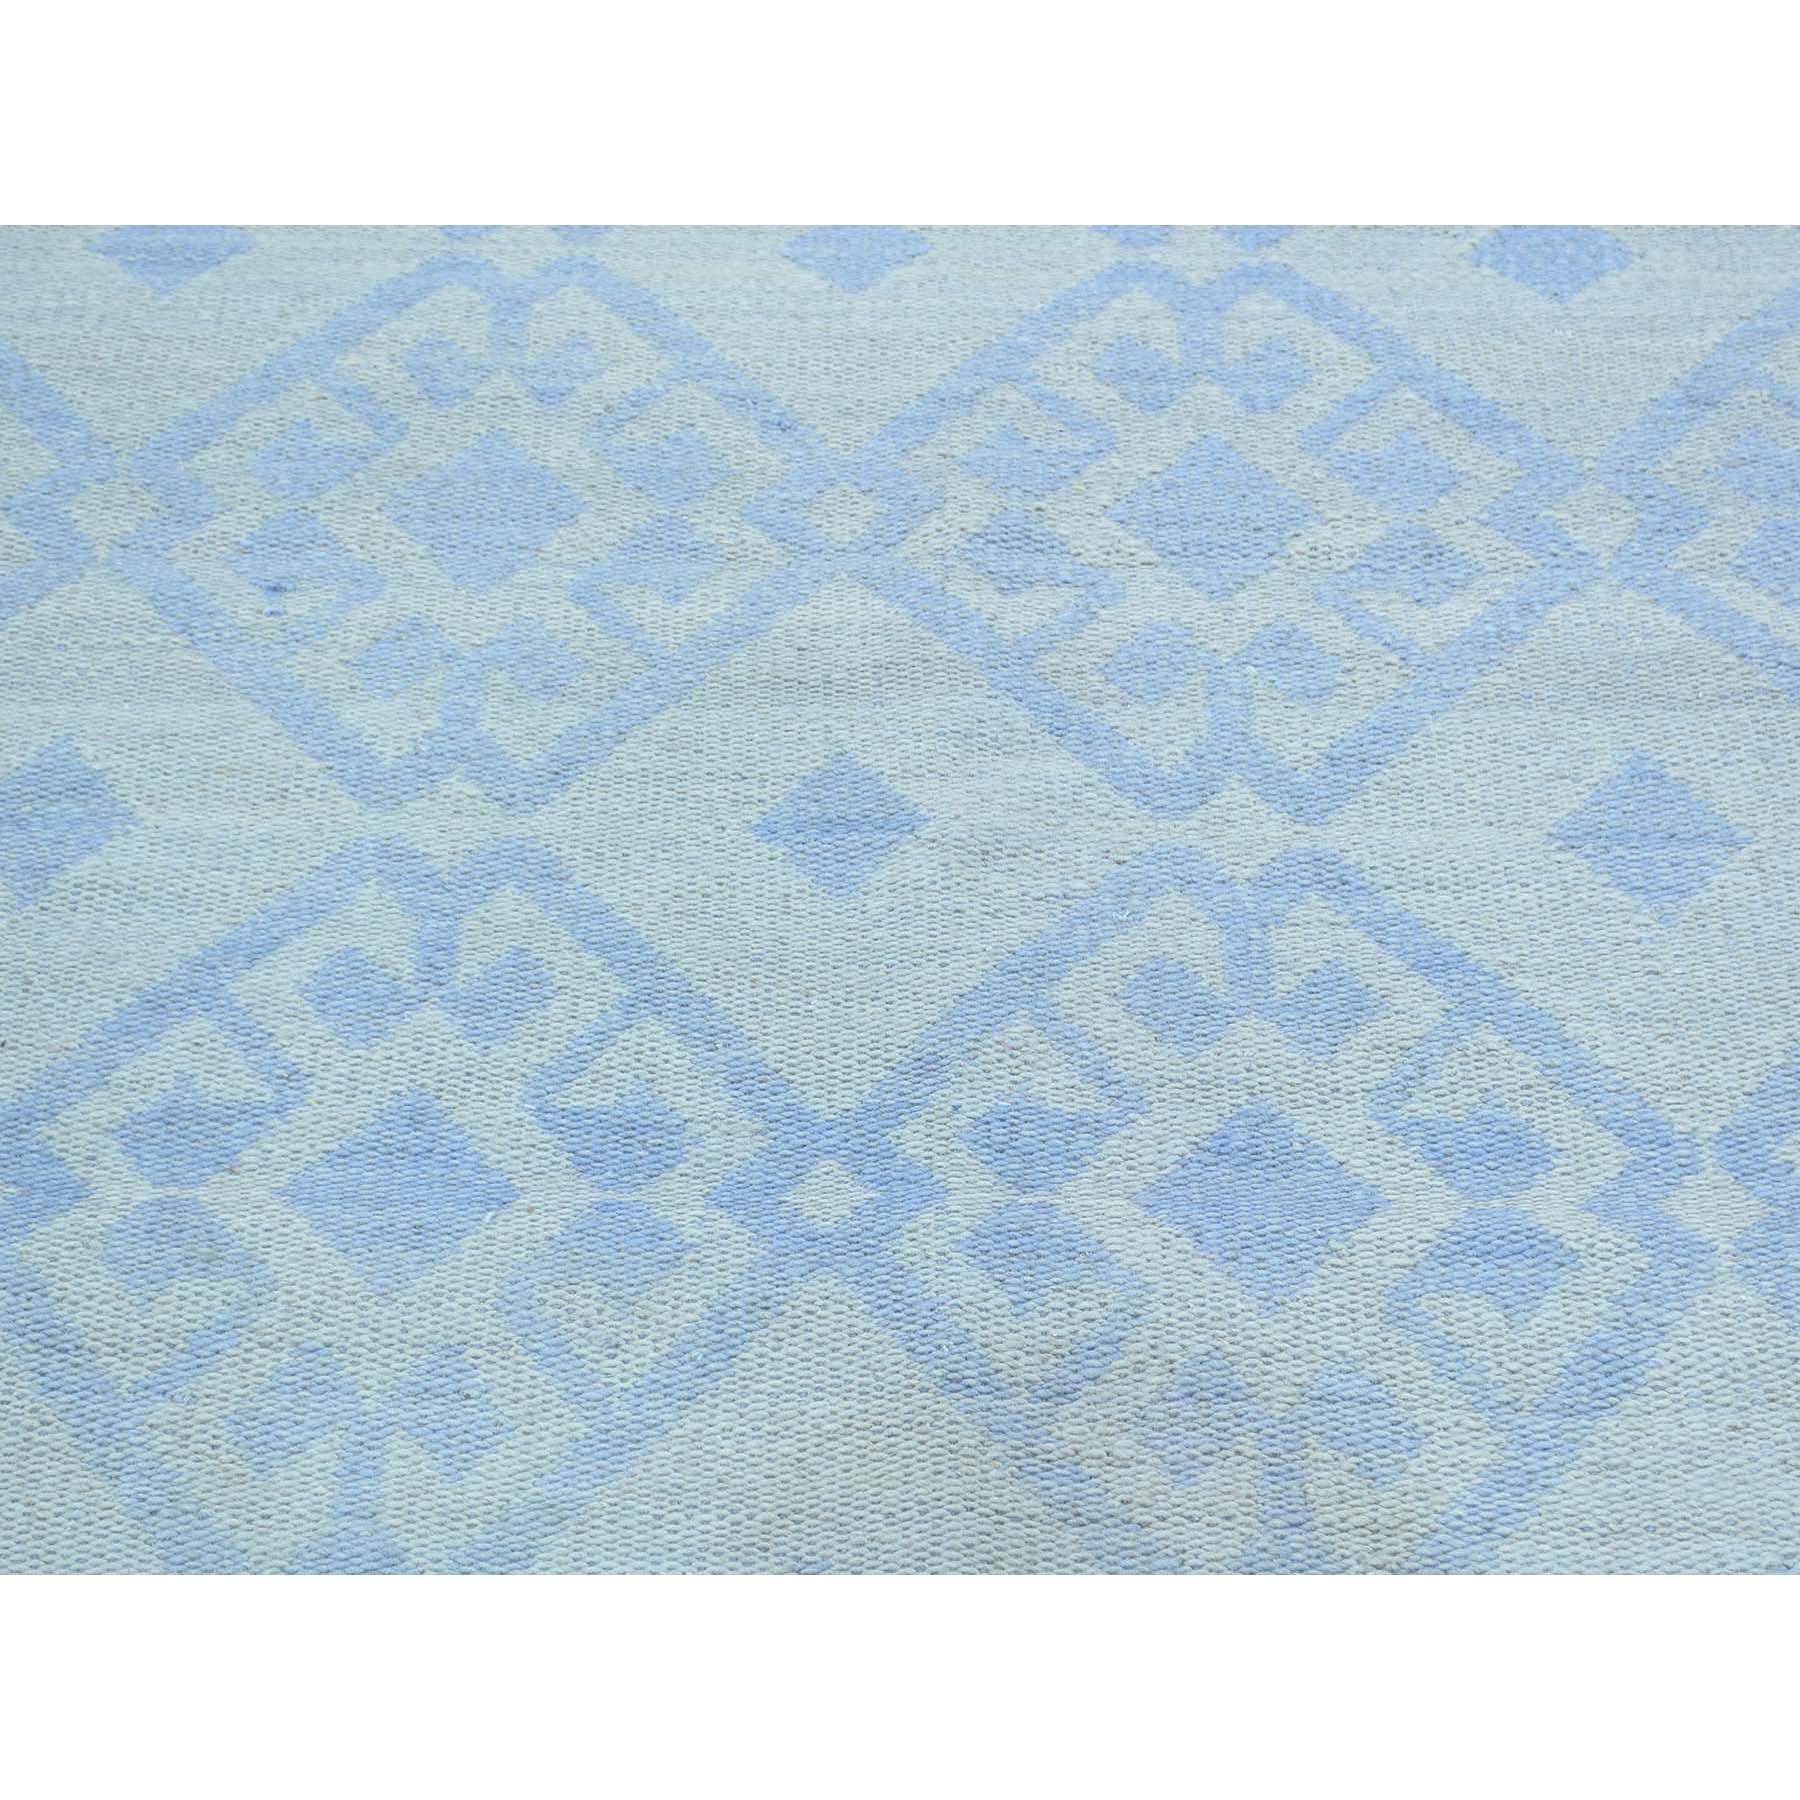 7-10 x7-10  Hand-Woven Flat Weave Reversible Durie Kilim Square Rug 